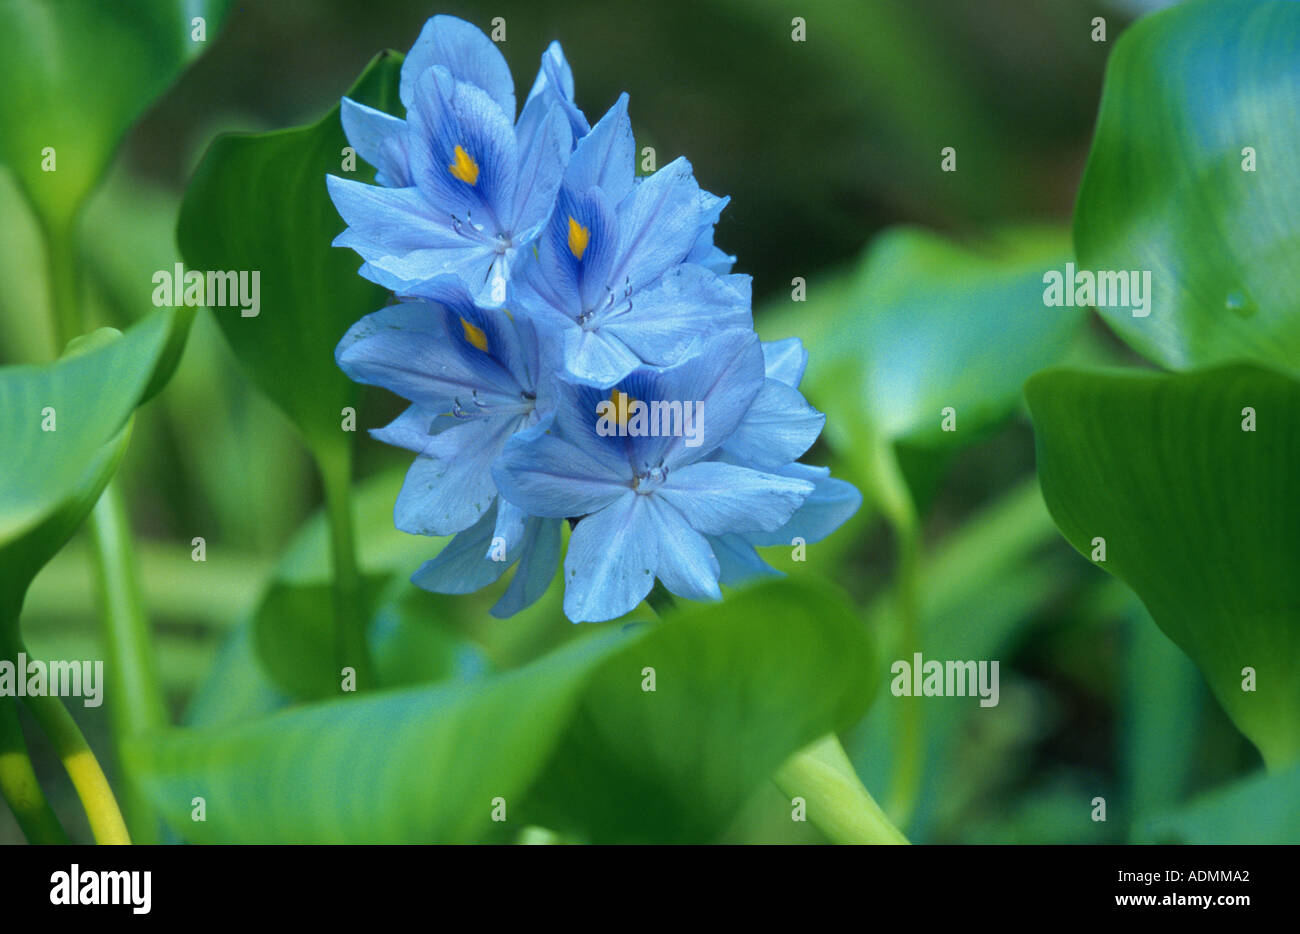 waterhyacinth, common water-hyacinth (Eichhornia crassipes), blooming Stock Photo